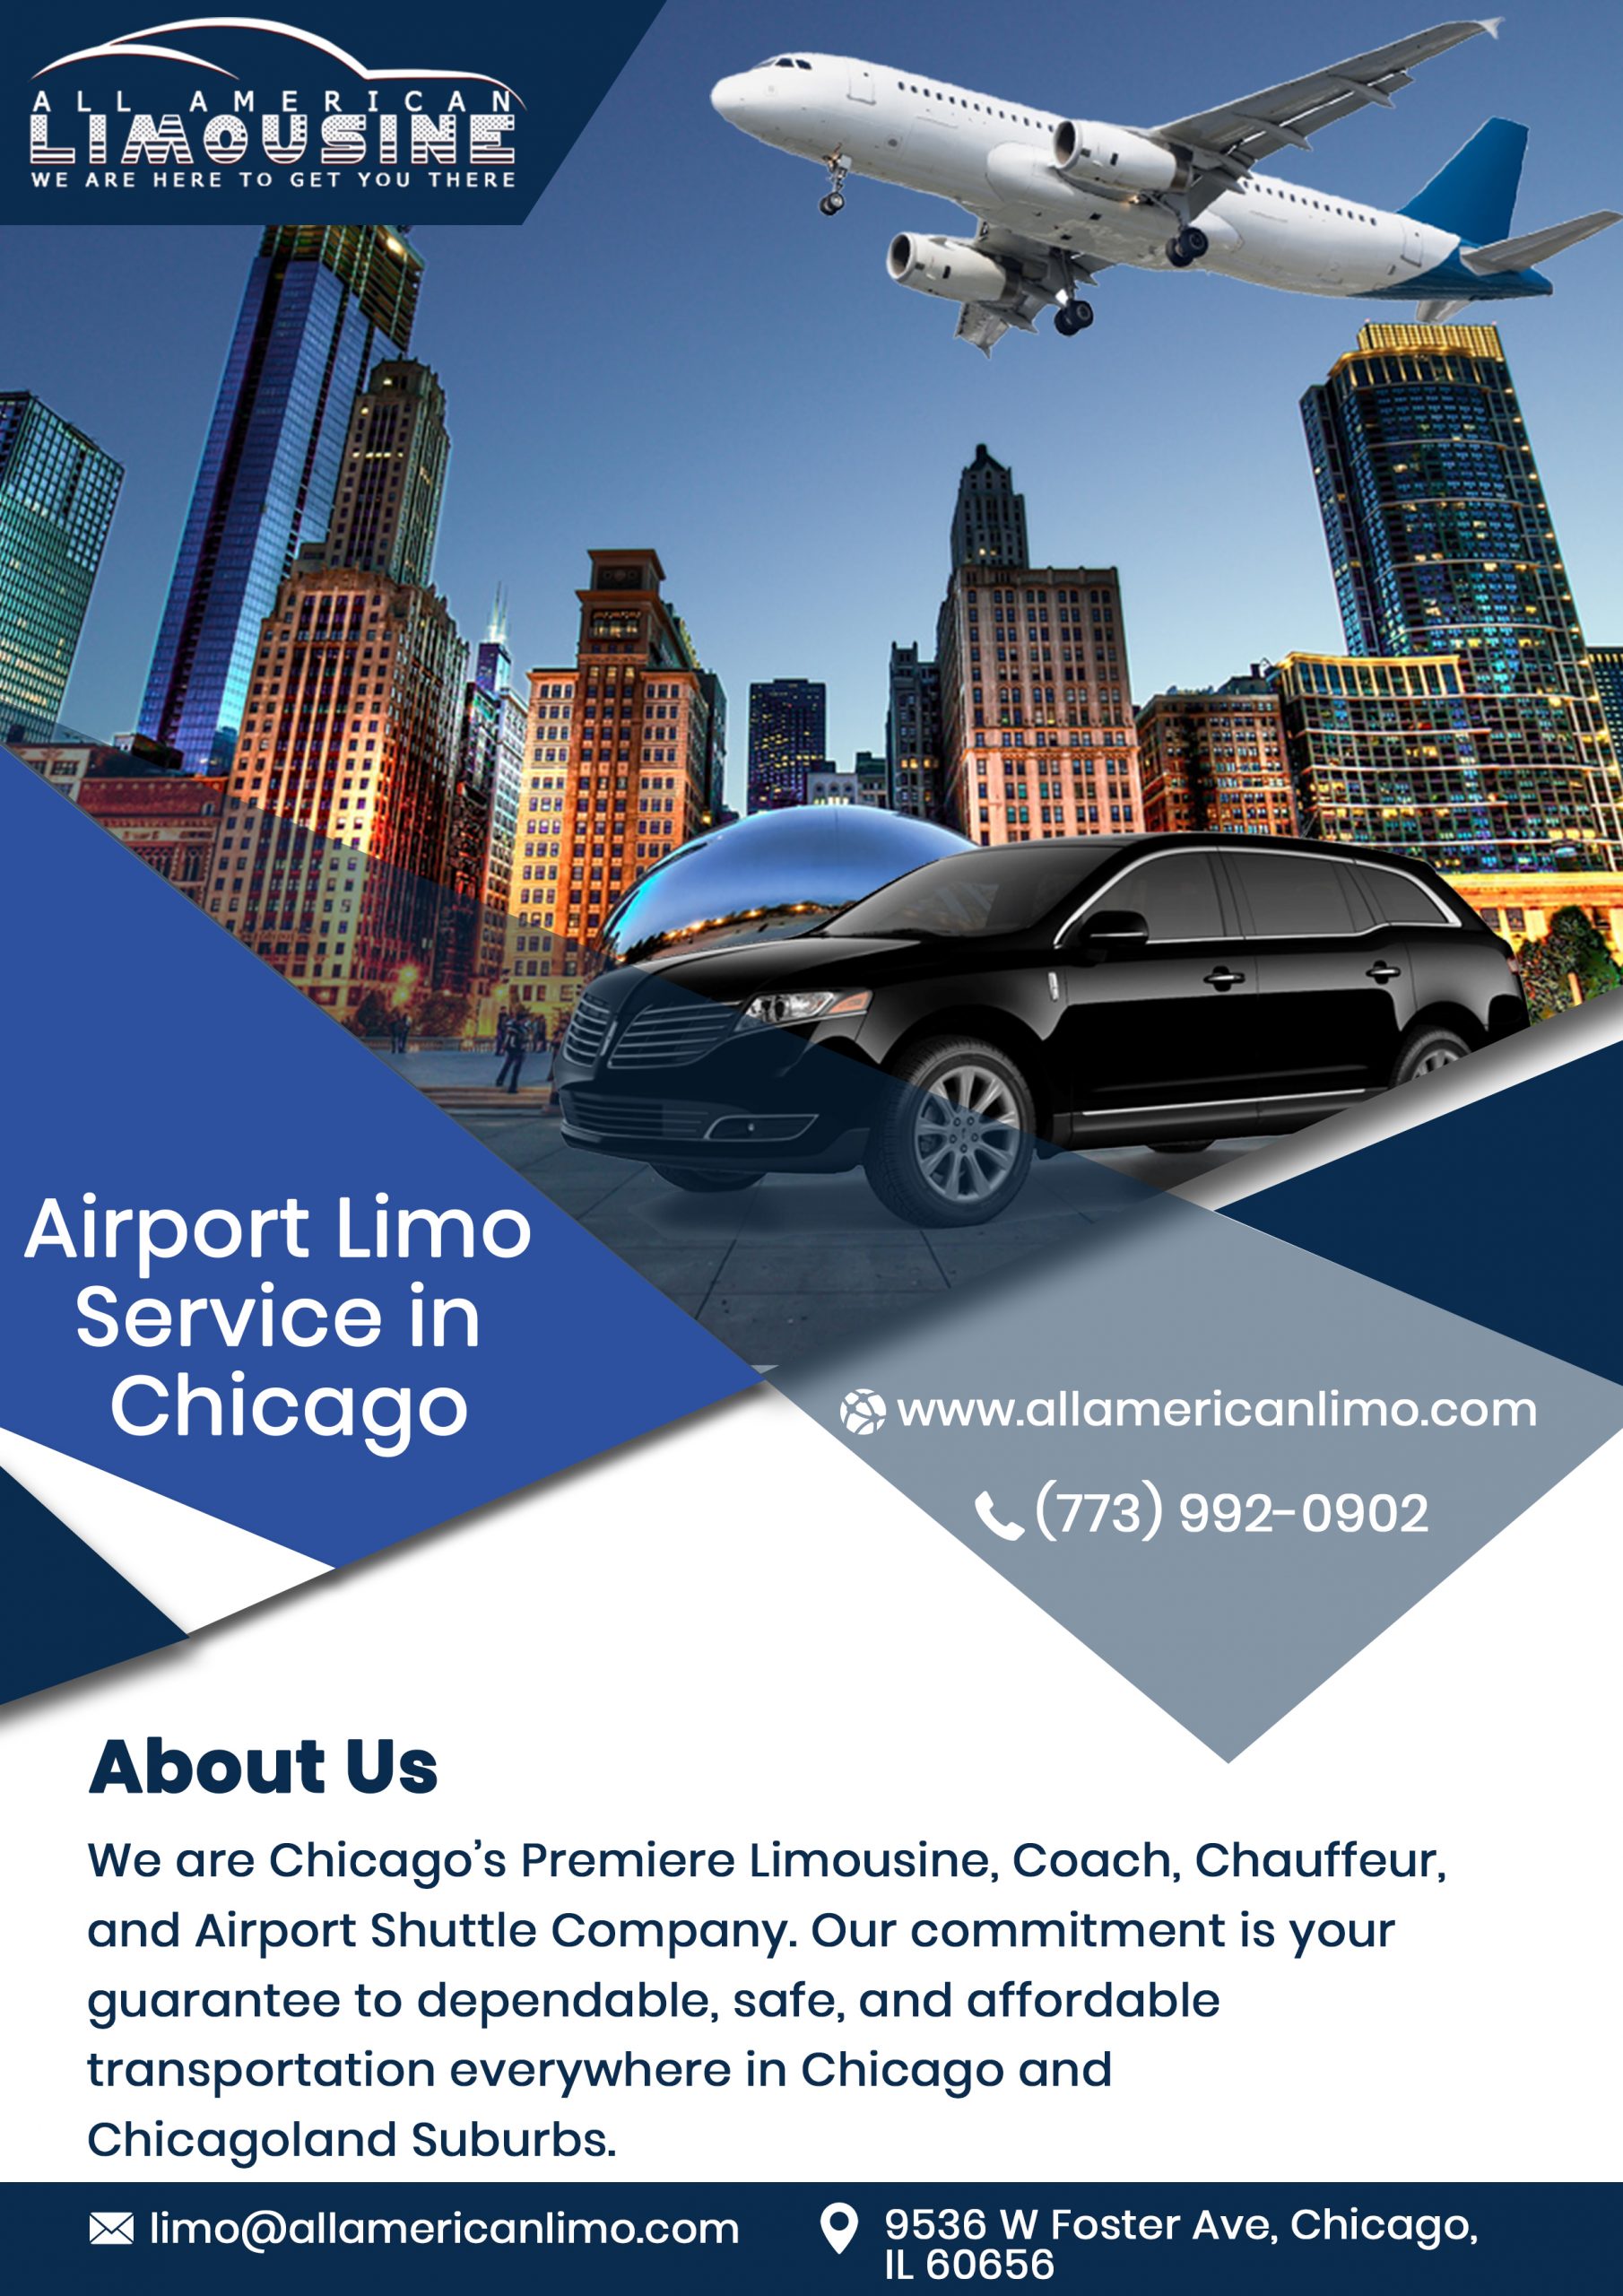 Chicago Car Service Near Me 60642, Party Bus 60642, Mercedes Sprinter Limo to 60642, Chicago Limo 60642, Limo Service 60642 to Airport, Hire, Rent, Get, Find, Car Service 60642 to Airport, Transportation Service 60642 to O'Hare, Corporate Travel 60642, Airport Travel 60642